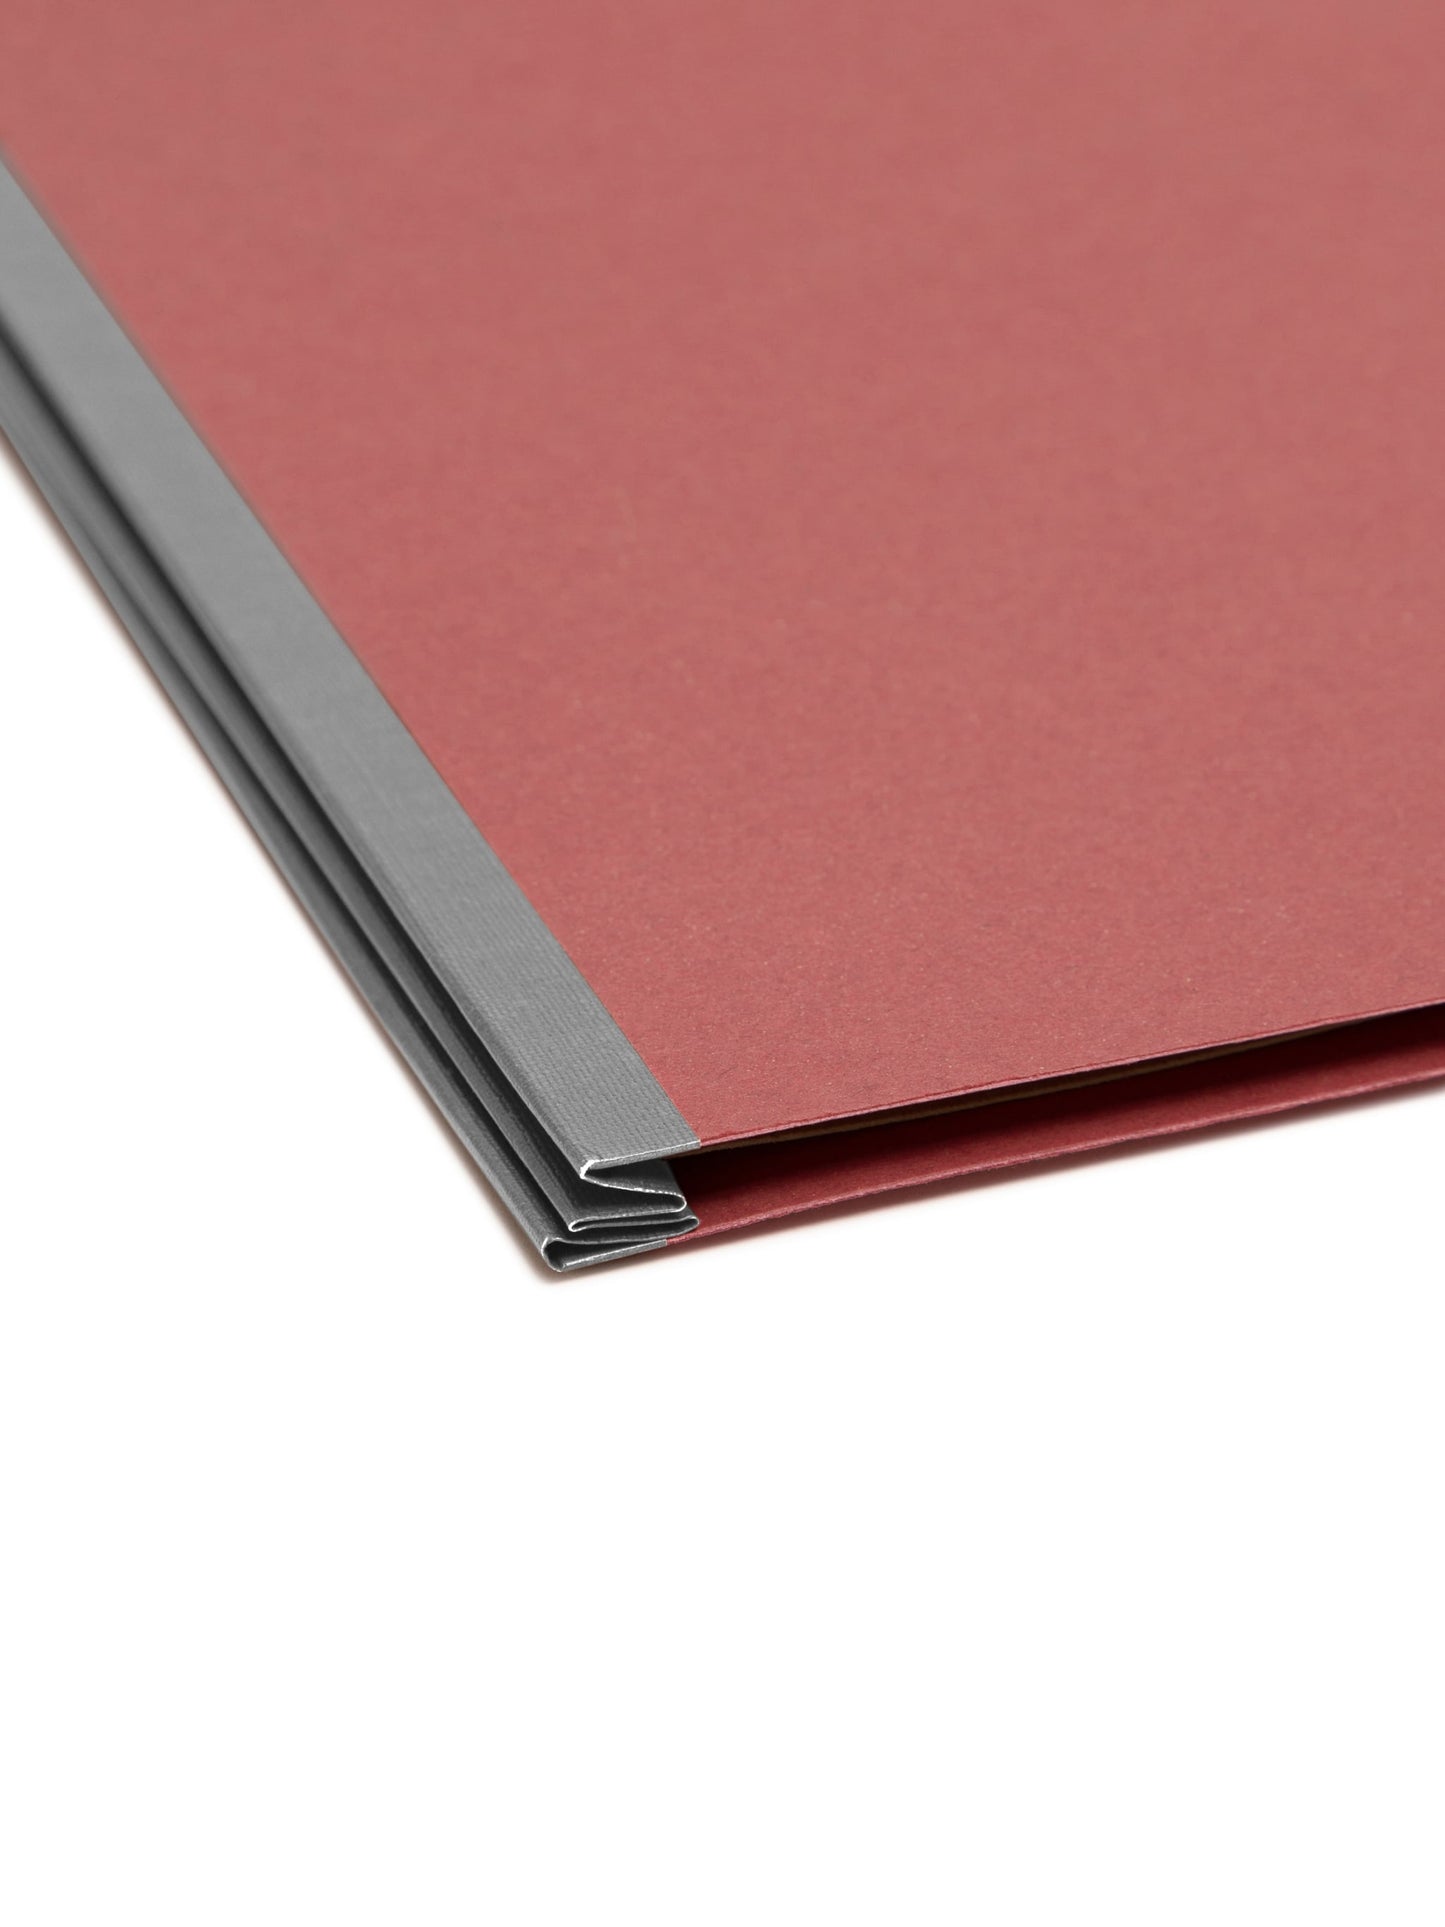 Pressboard Classification File Folders, 2 Dividers, 2 inch Expansion, Red Color, Legal Size, 